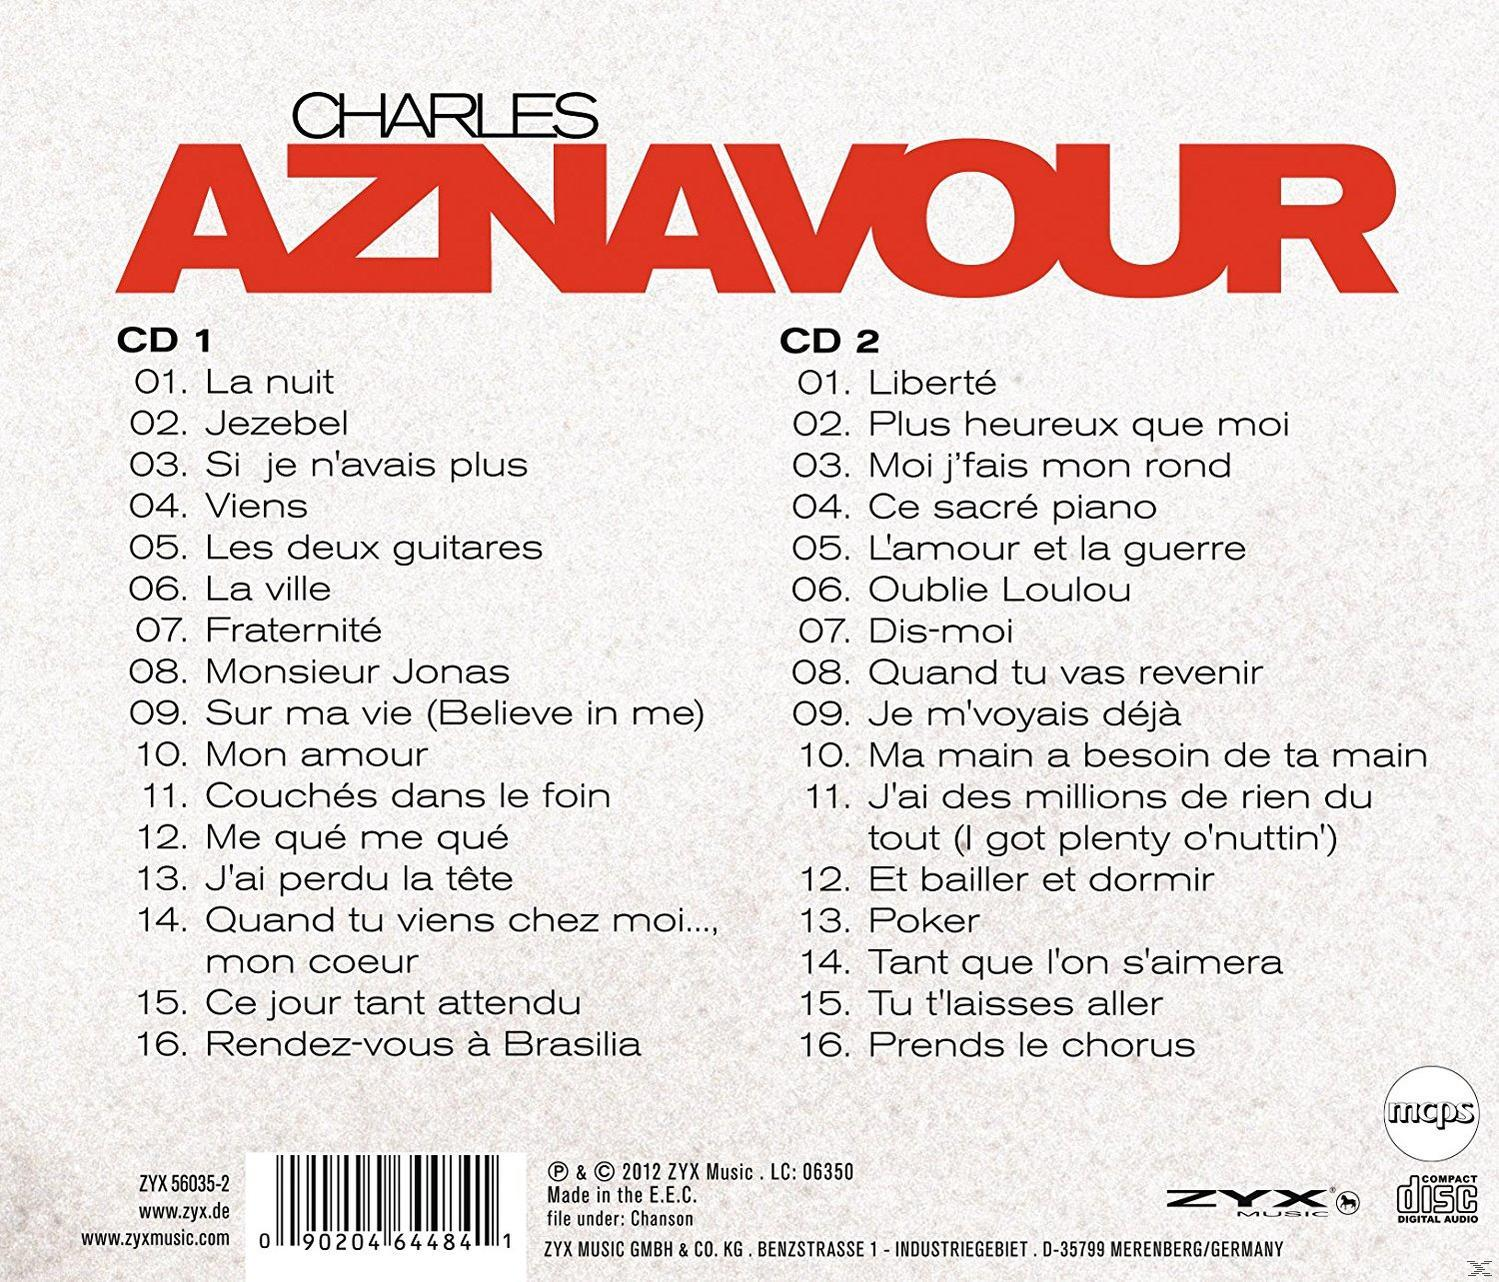 Vie-His (CD) Hits Ma - Charles - Aznavour Greatest Sur